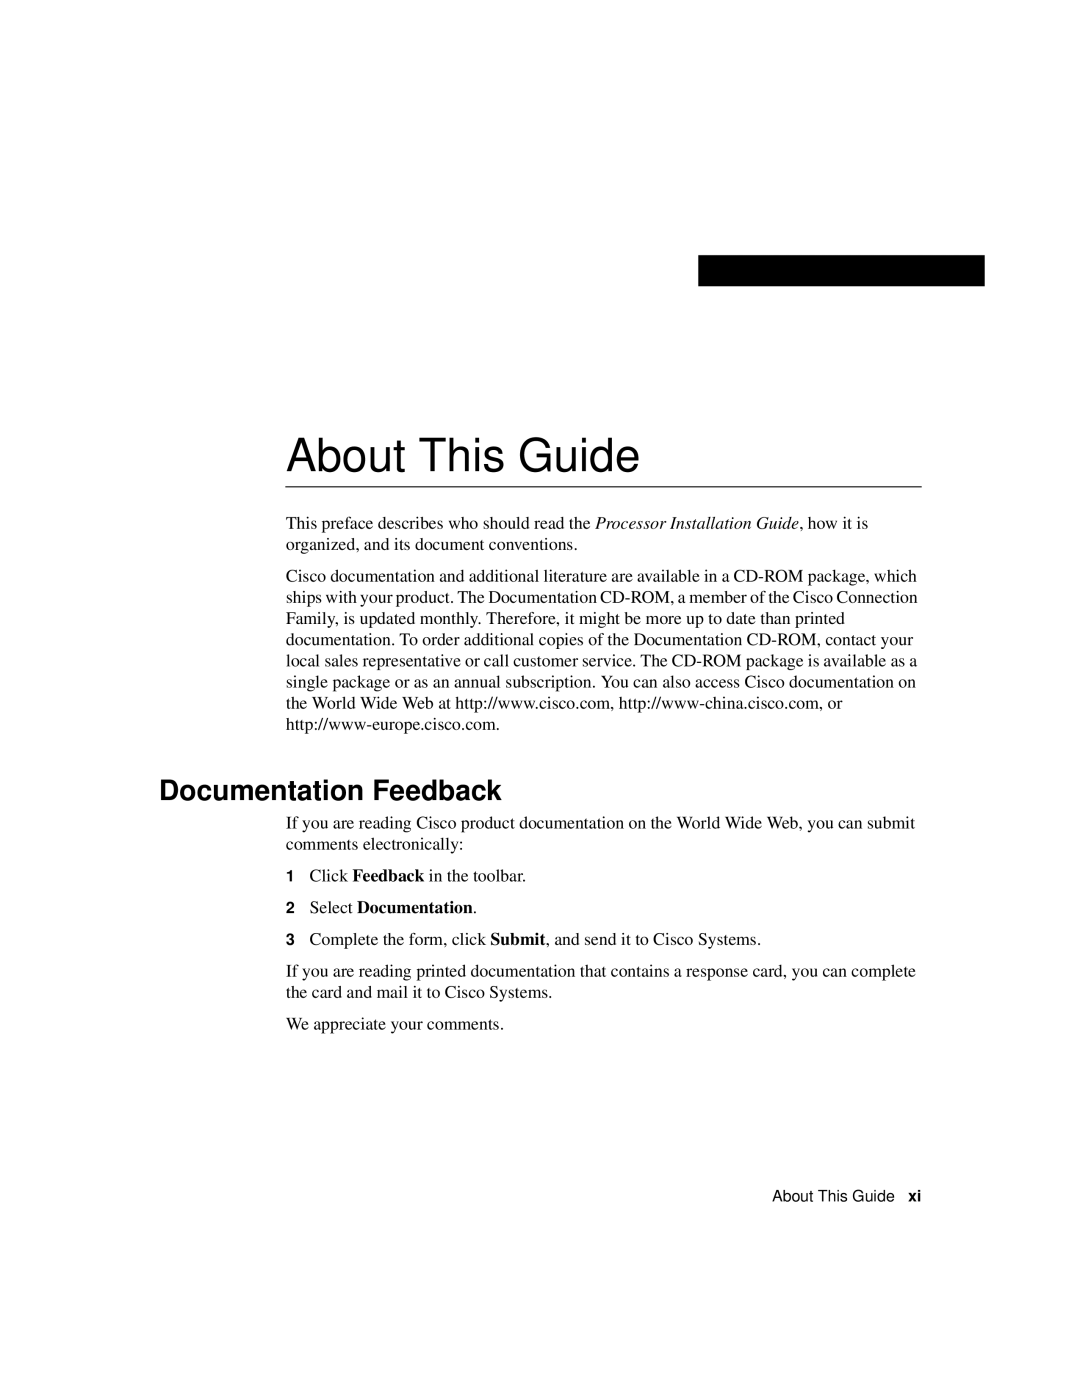 Cisco Systems Computer Accessories manual Documentation Feedback, About This Guide, Select Documentation 